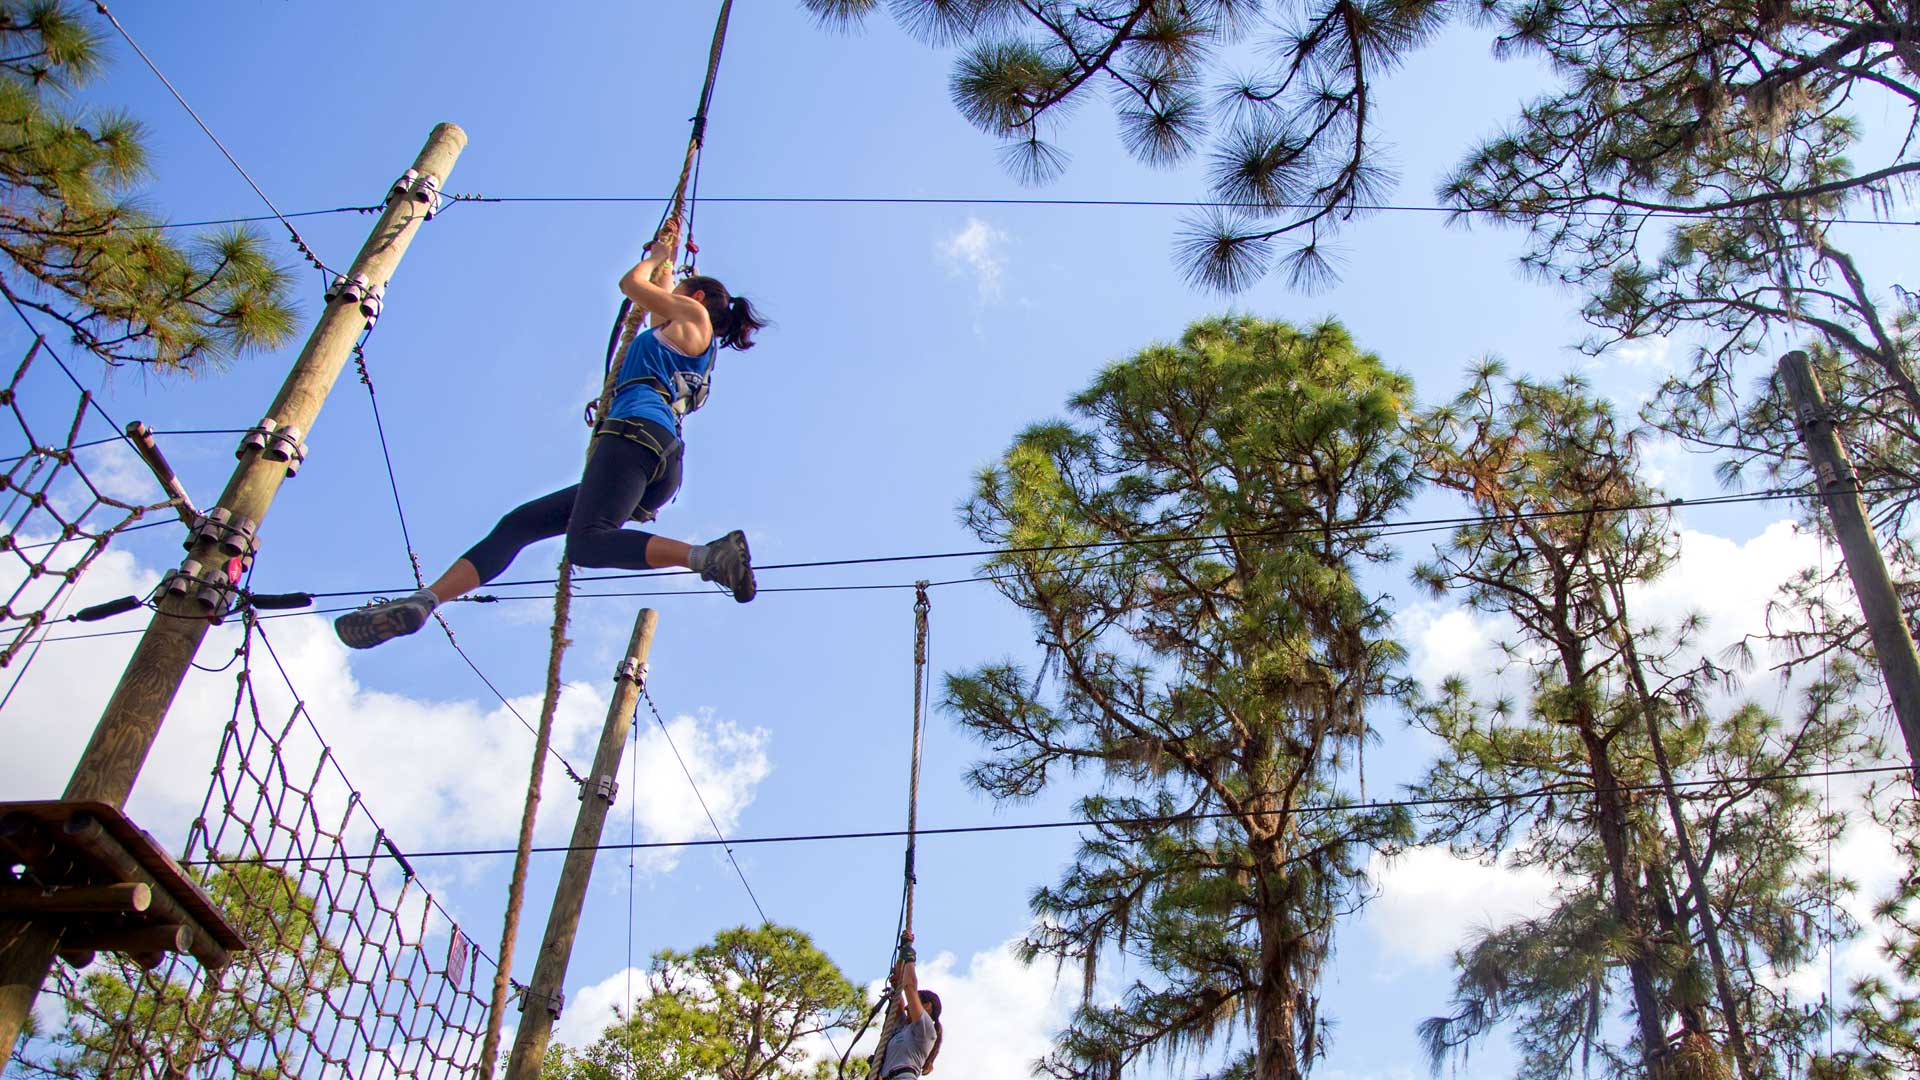 TreeUmph! Adventure Course  100+ Challenging Obstacles, Ropes, & Ziplines